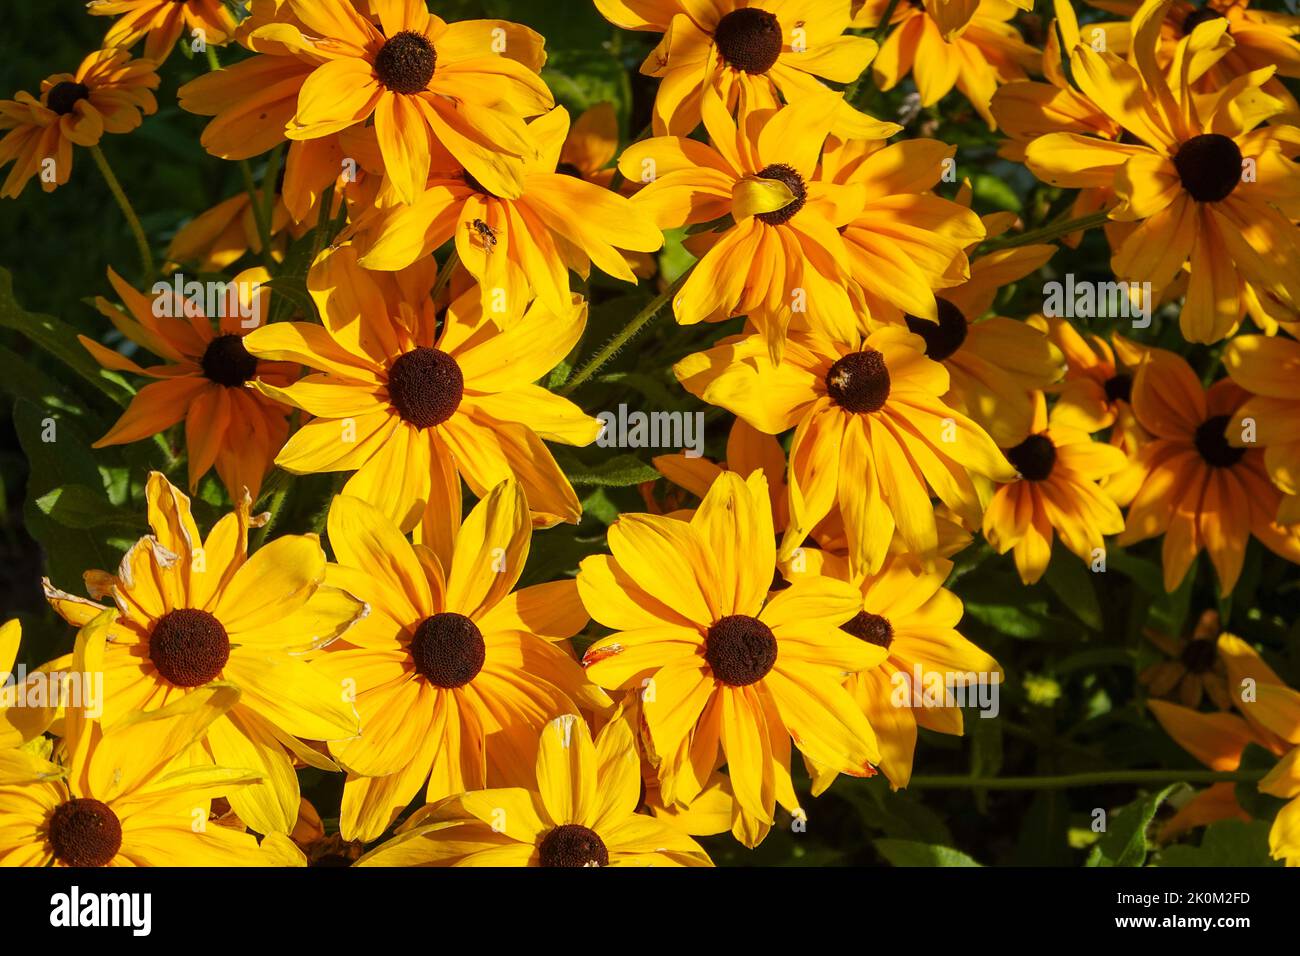 Cluster of bright yellow flowers. Stock Photo